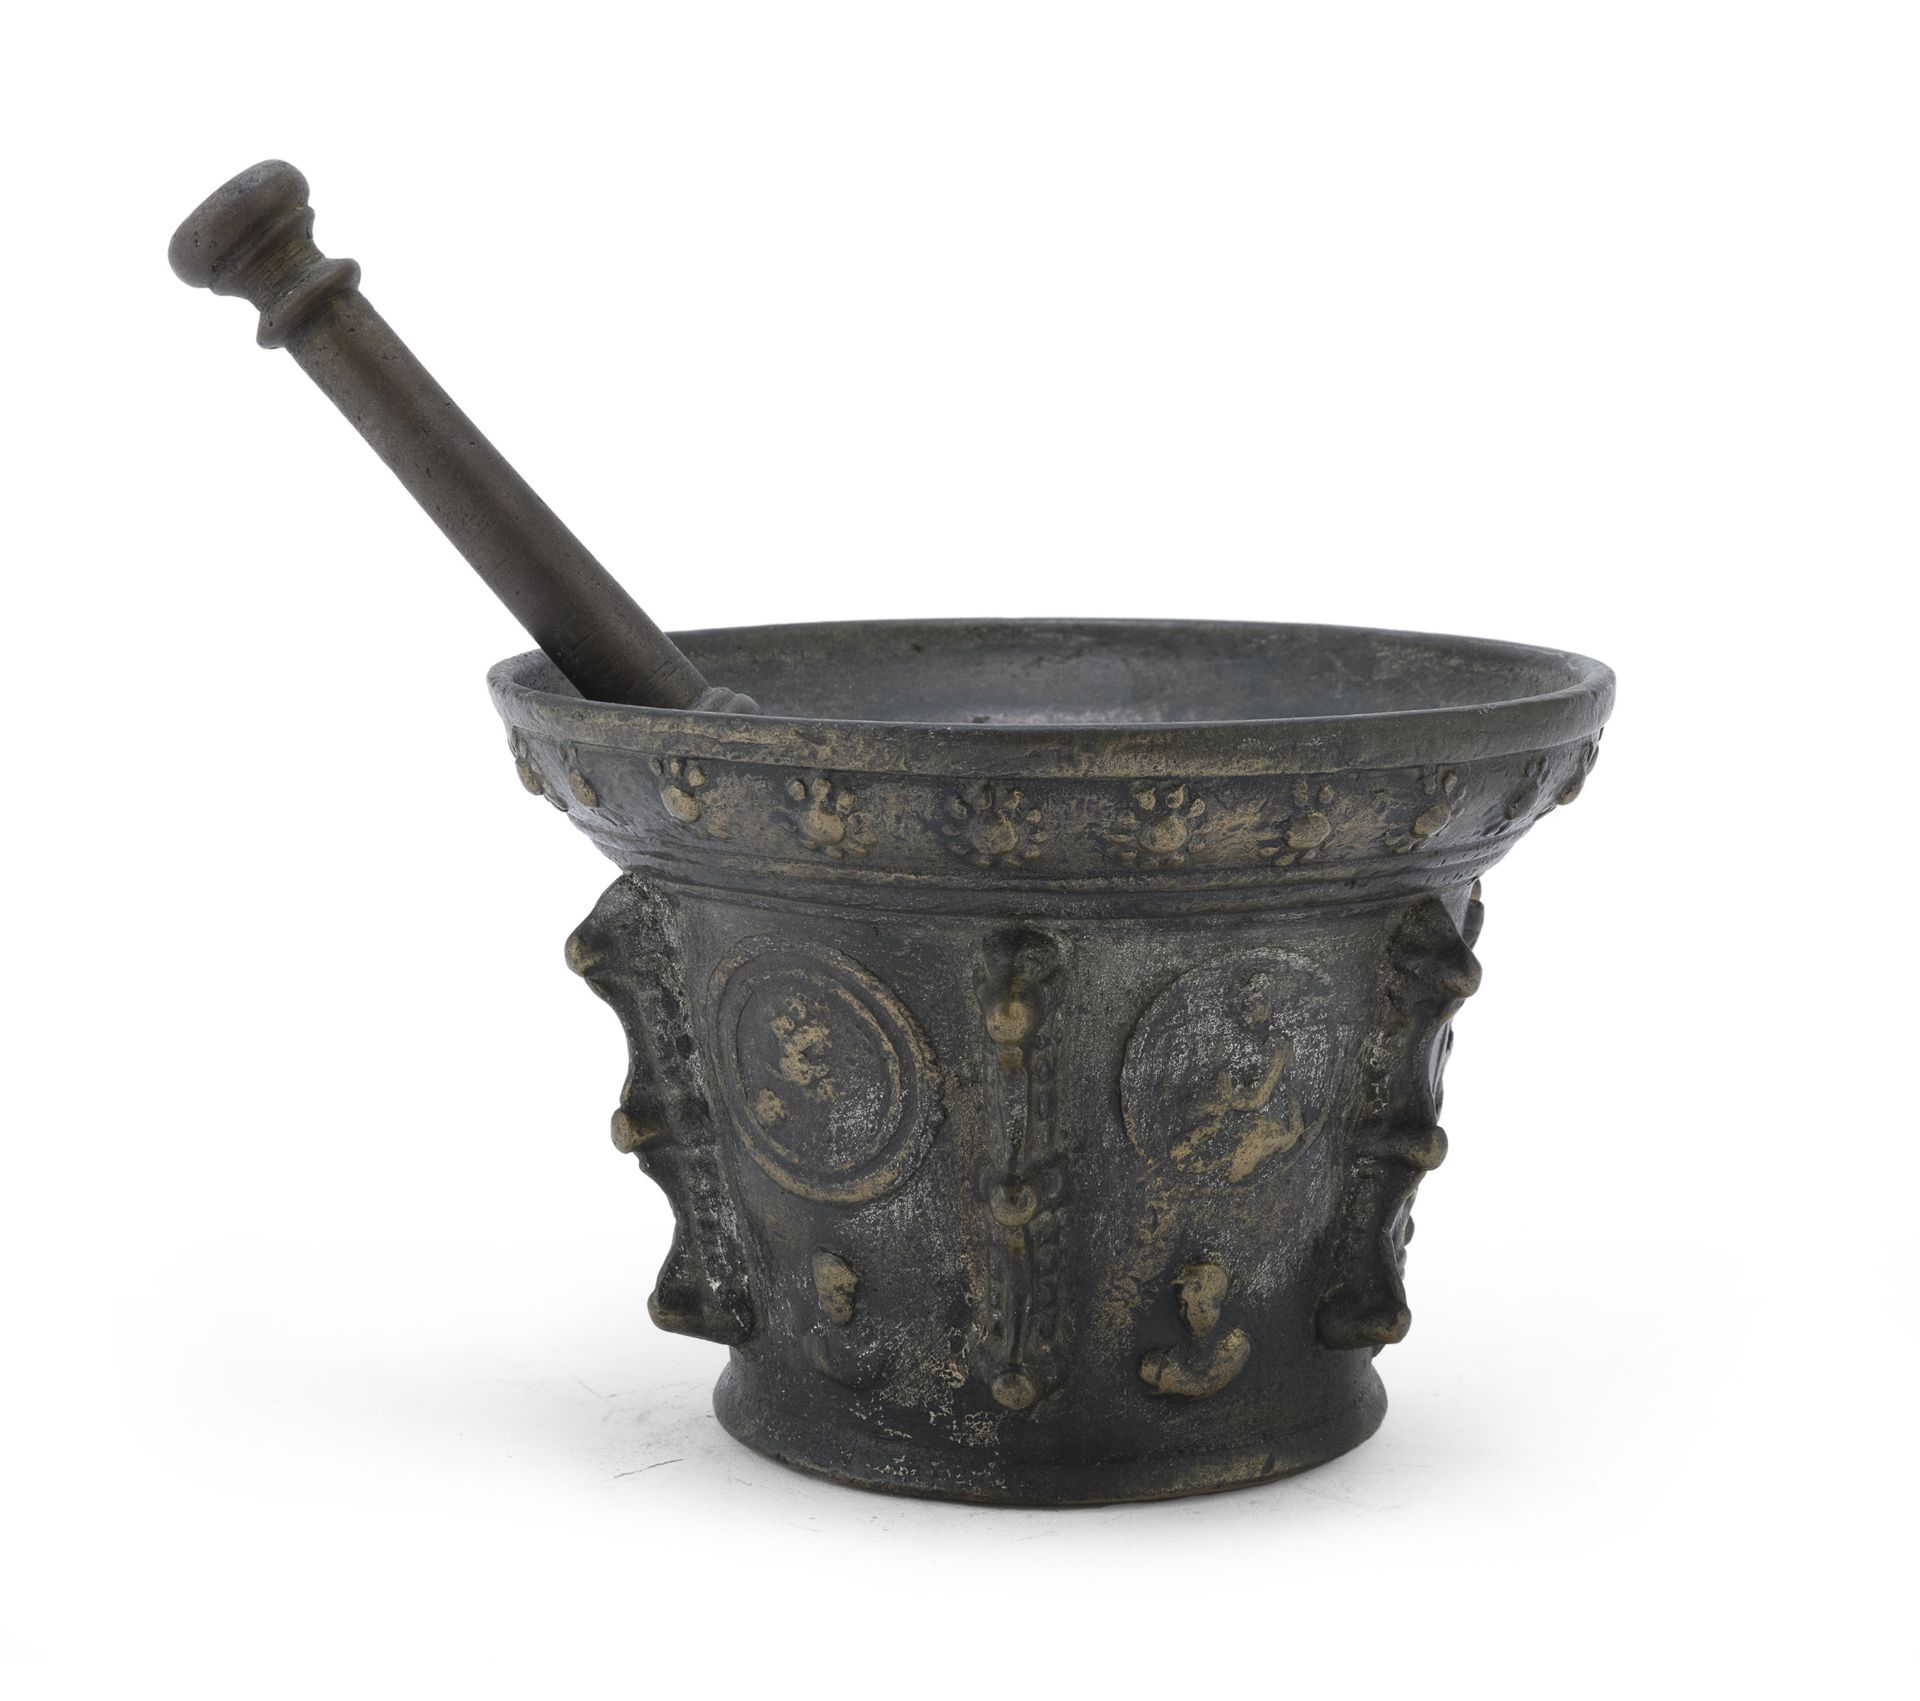 BRONZE MORTAR AND PESTLE LATE 16TH CENTURY